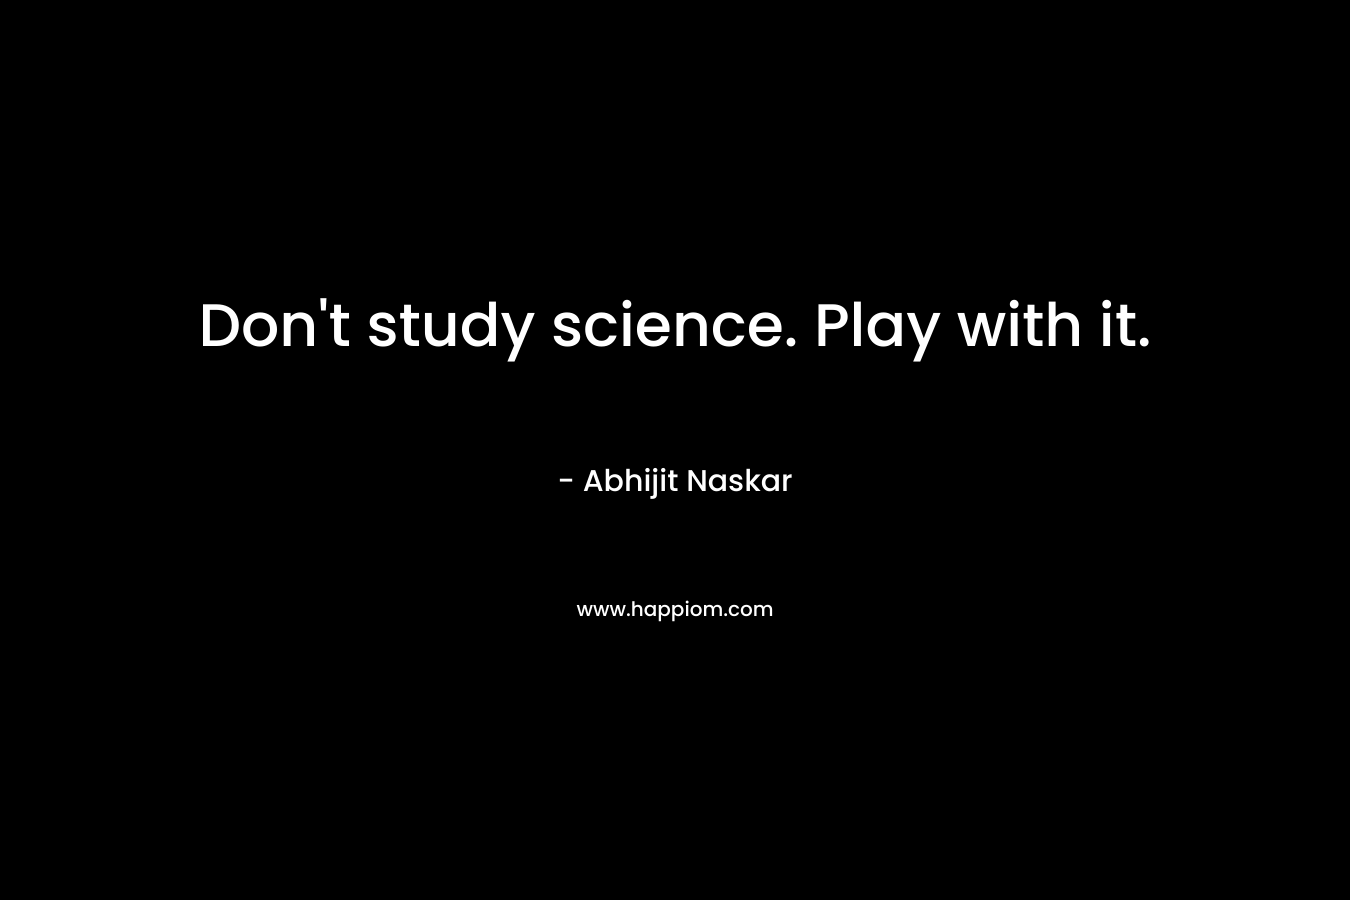 Don't study science. Play with it.